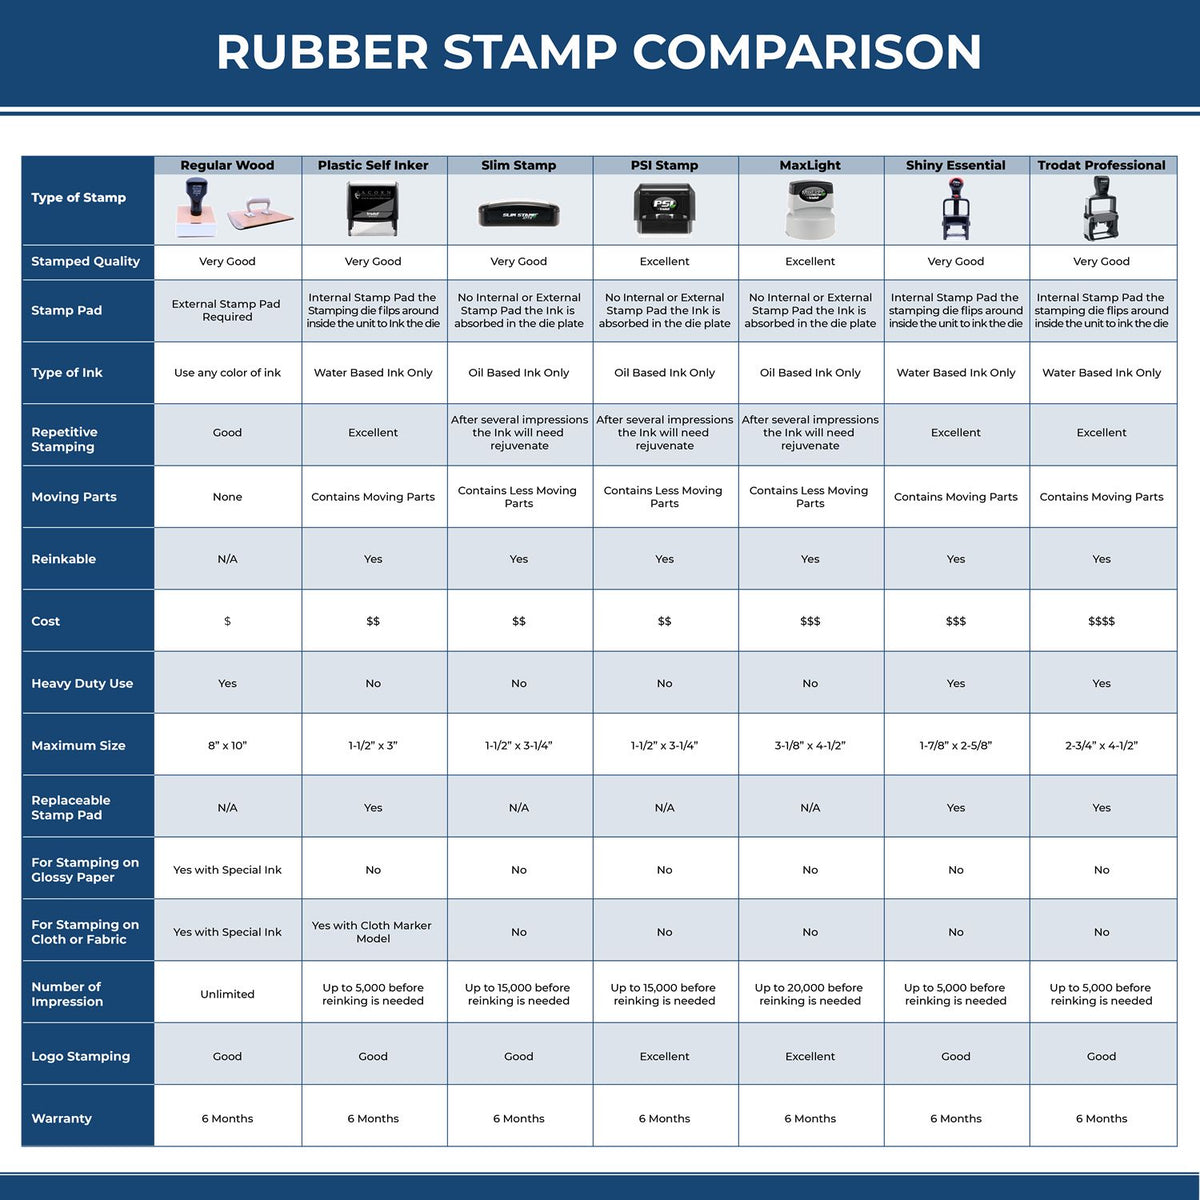 Large Self Inking Closed Account Stamp 4563S Rubber Stamp Comparison